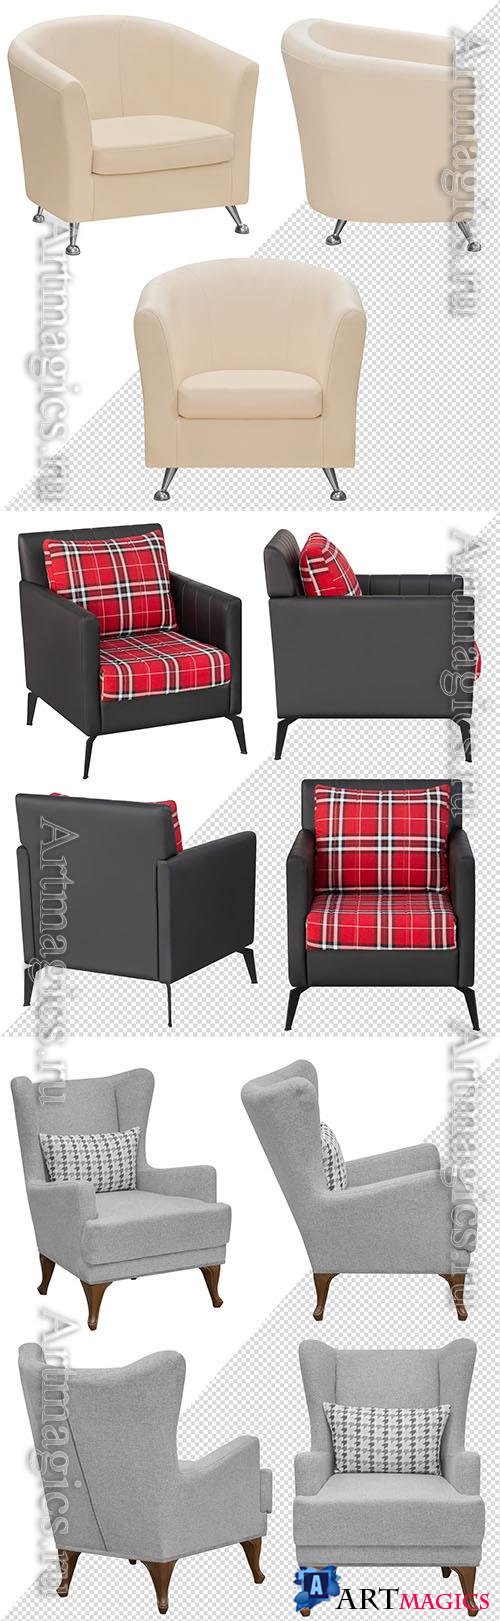 Upholstered armchair for the office or at home design template psd